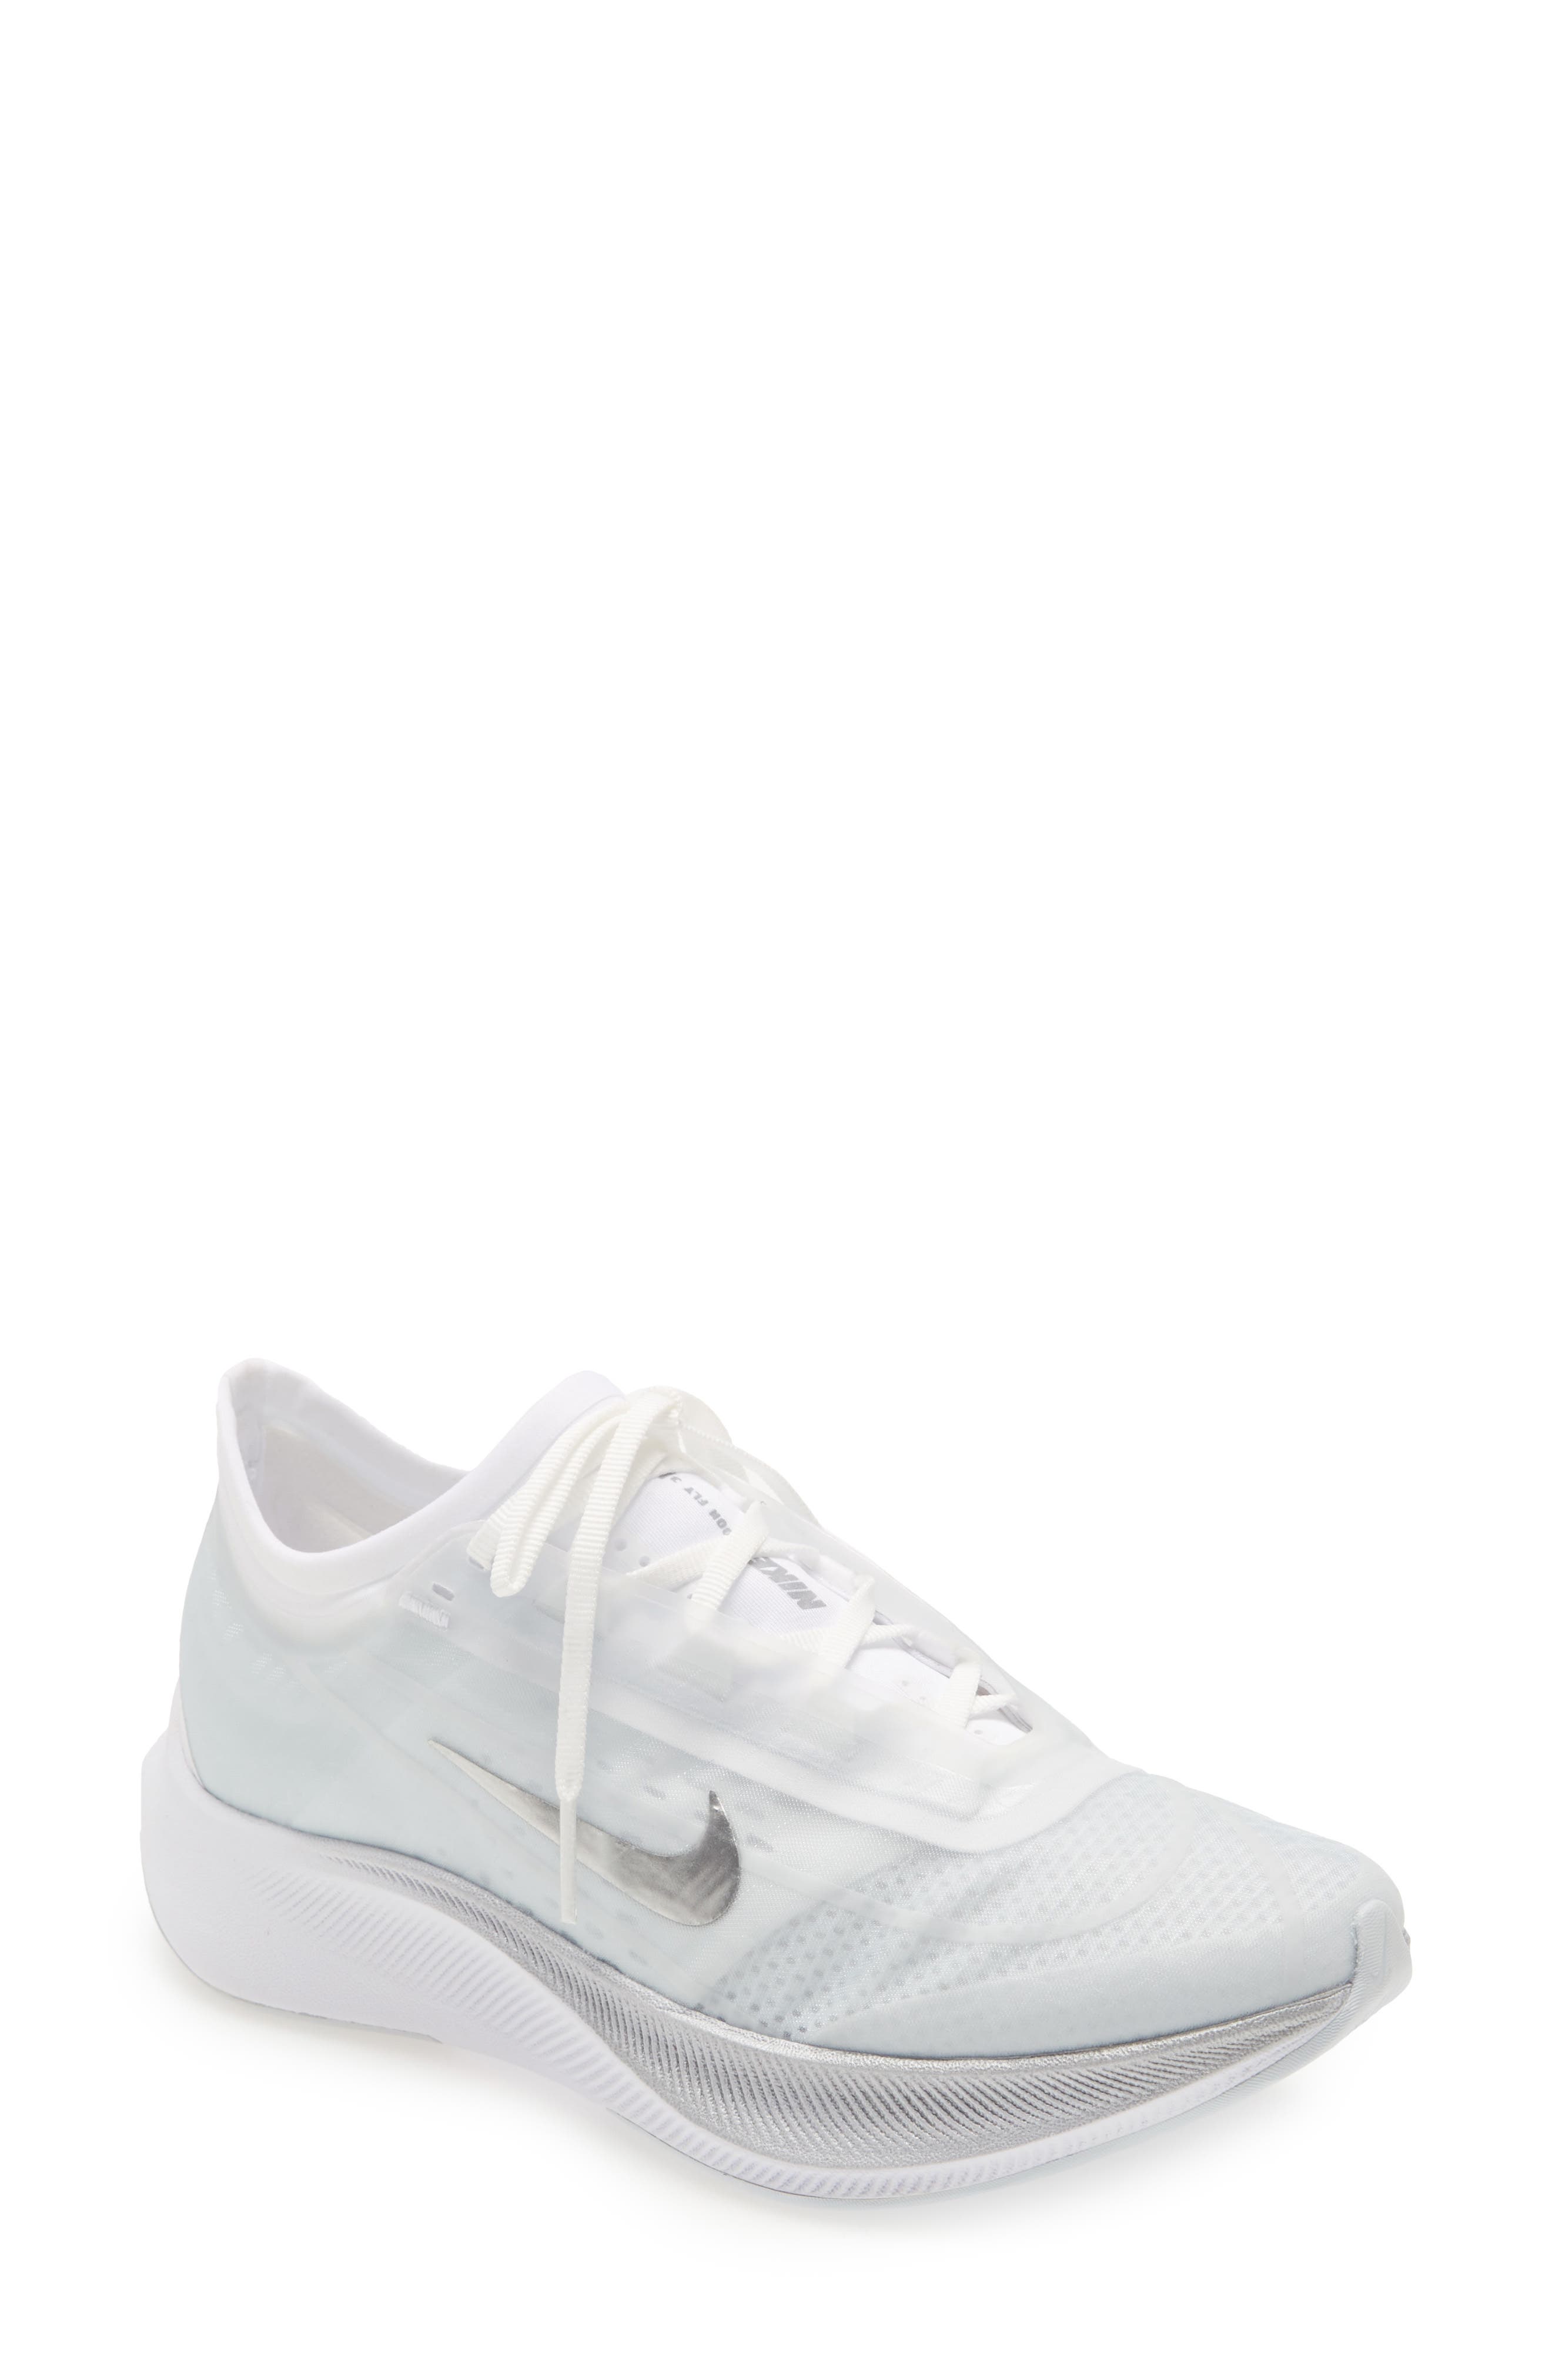 nike leather tennis shoes womens